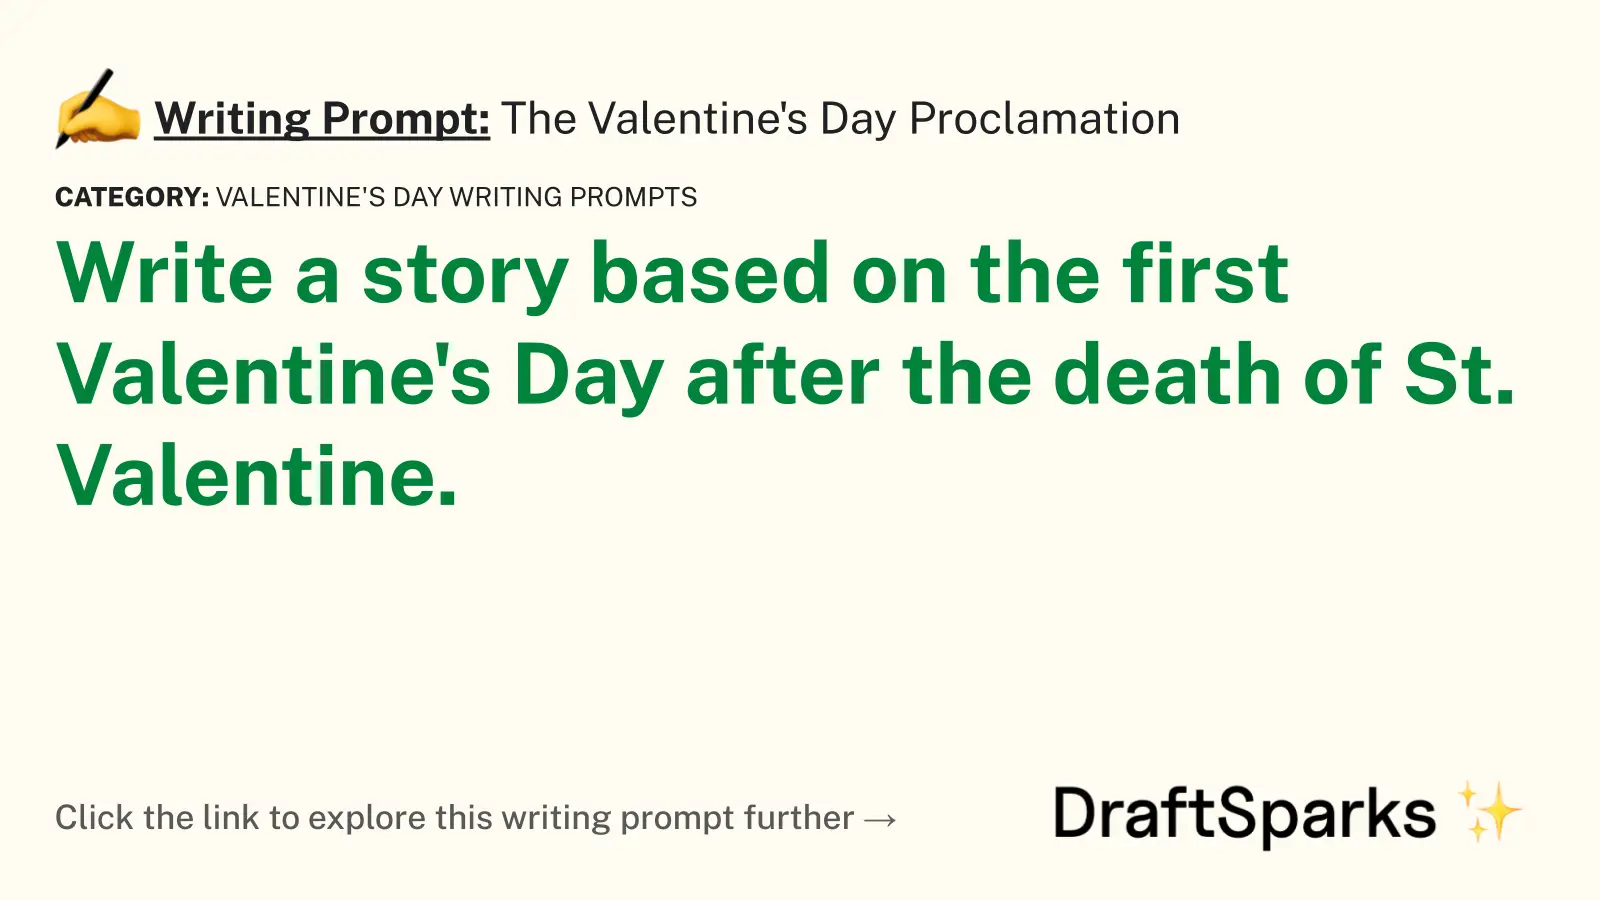 The Valentine’s Day Proclamation